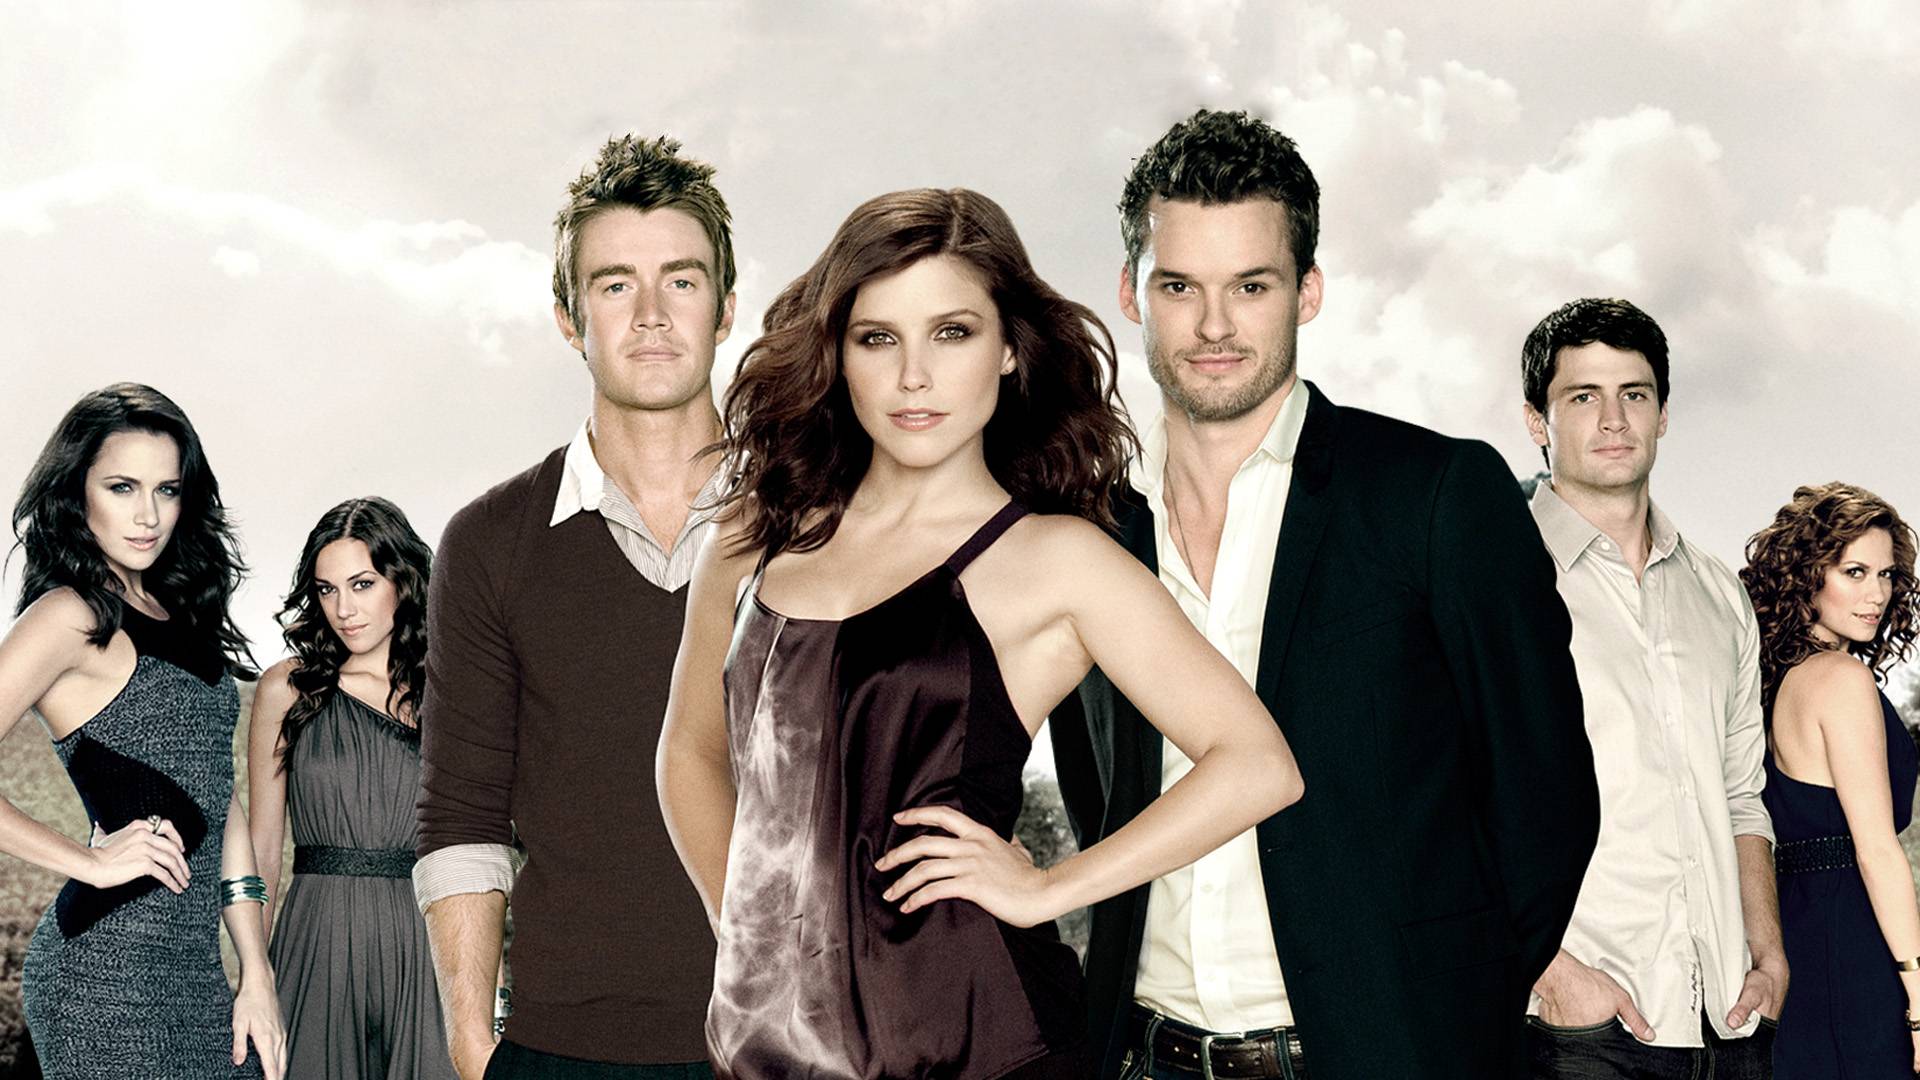 Who Does Brooke Davis End Up With On One Tree Hill?